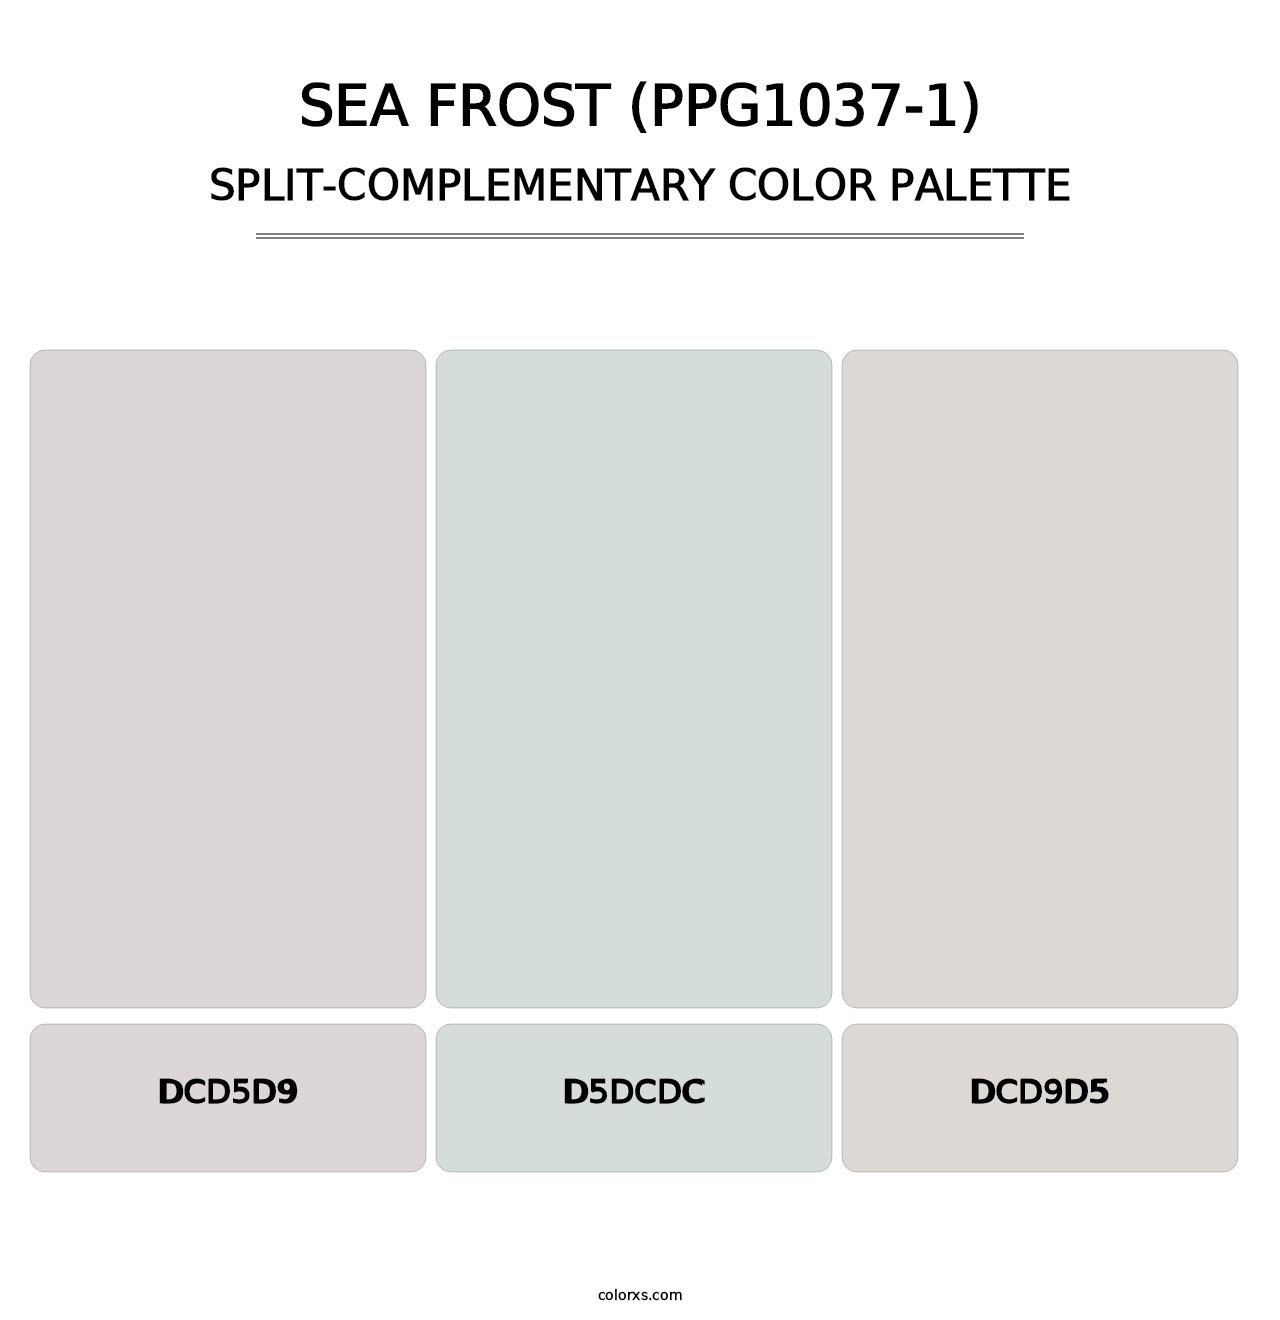 Sea Frost (PPG1037-1) - Split-Complementary Color Palette